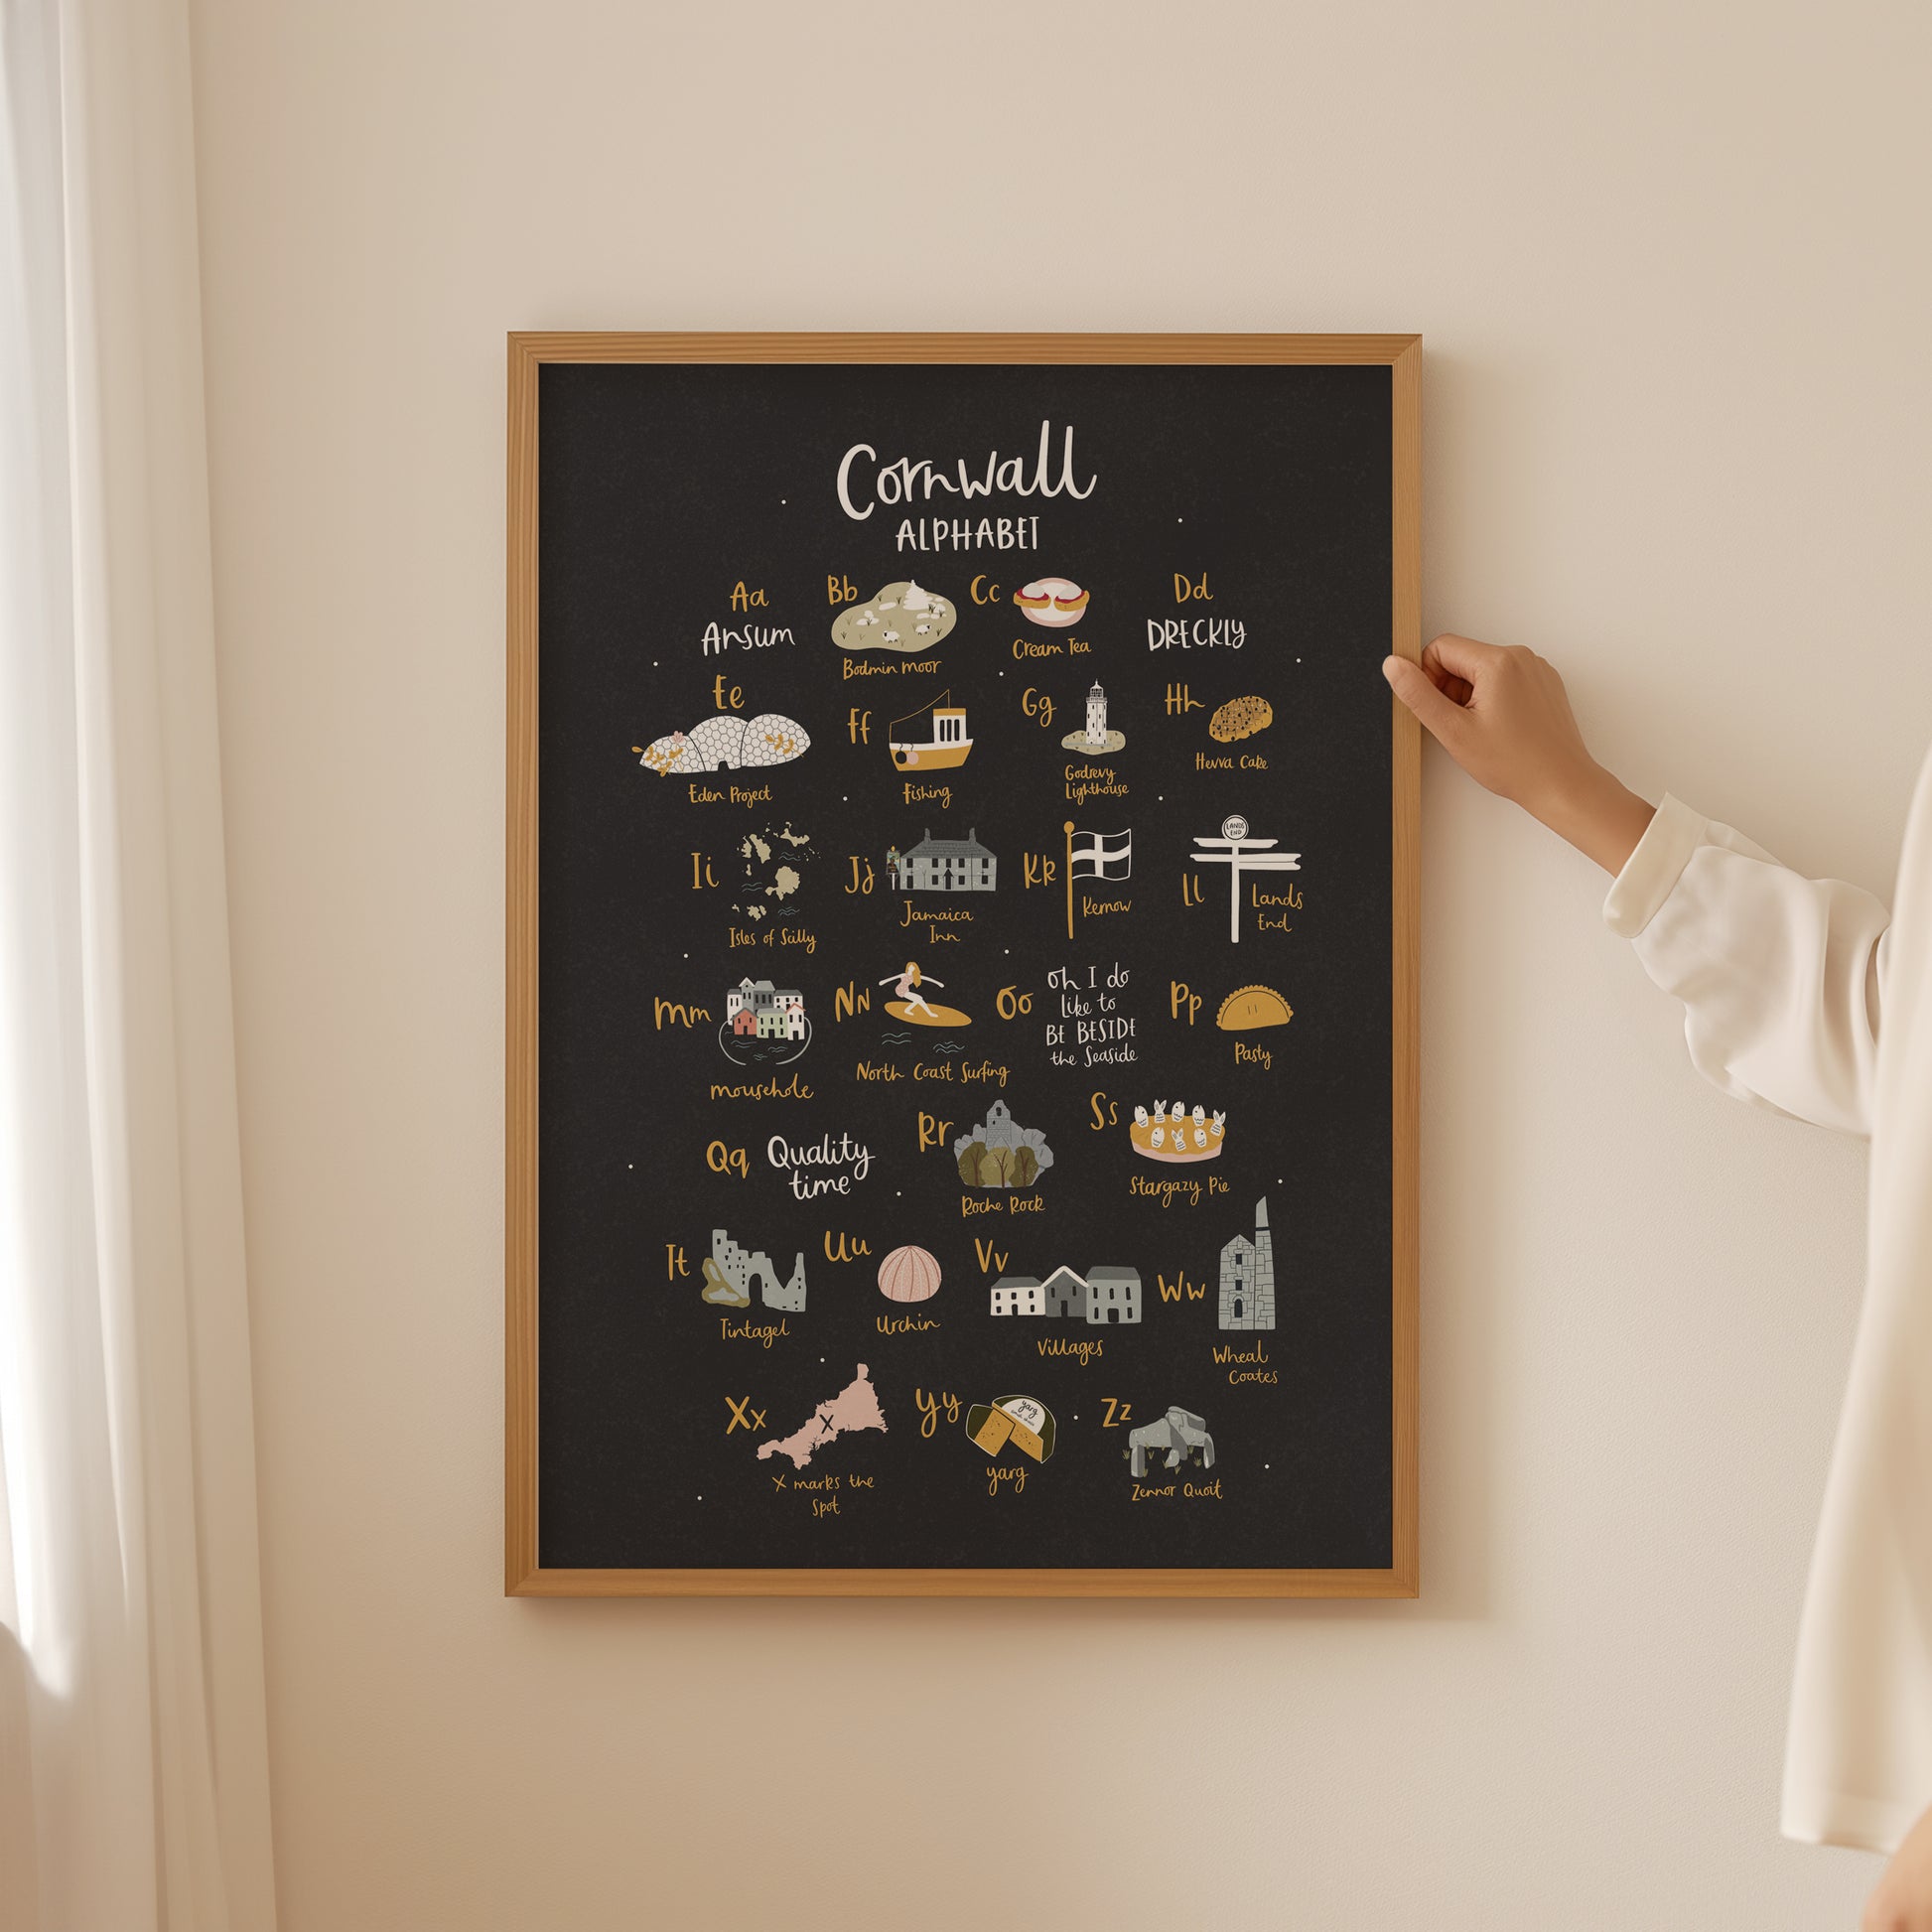 Cornwall alphabet print by Abbie Imagine. Featuring illustrations from A-z of famous things to do with Cornwall, such as a pasty and a cream tea!